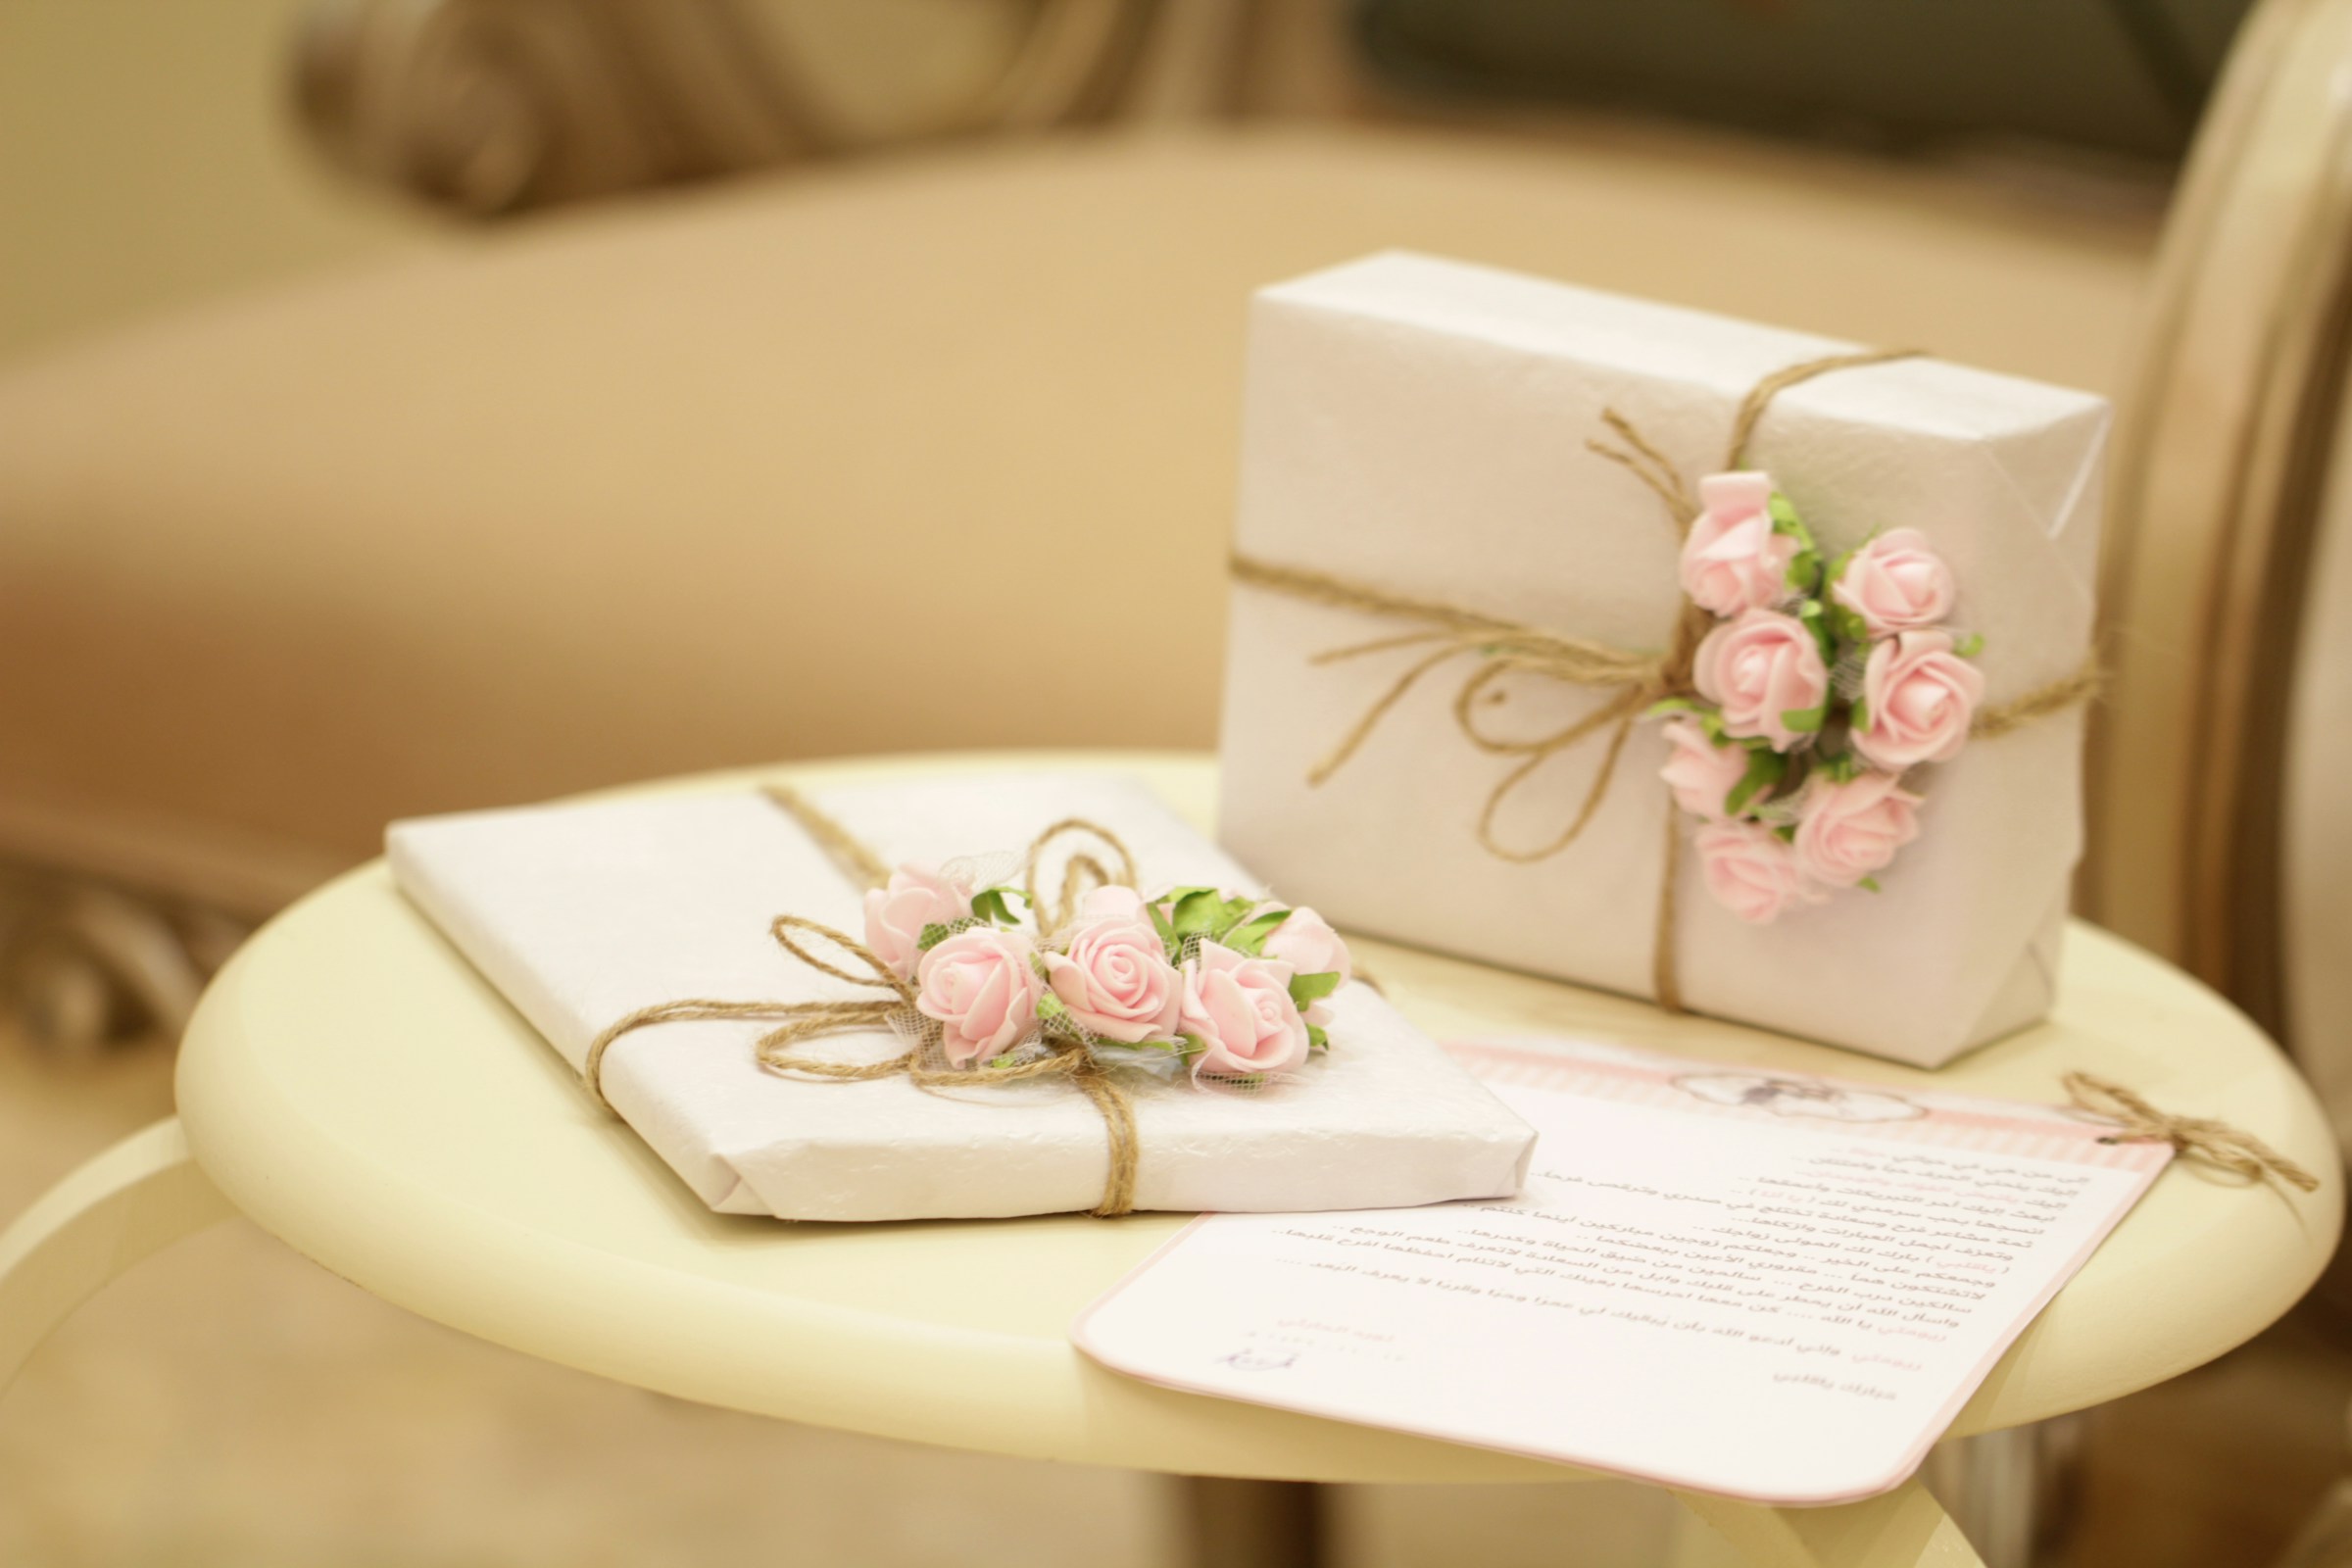 Two gift wrapped boxes | Source: Unsplash